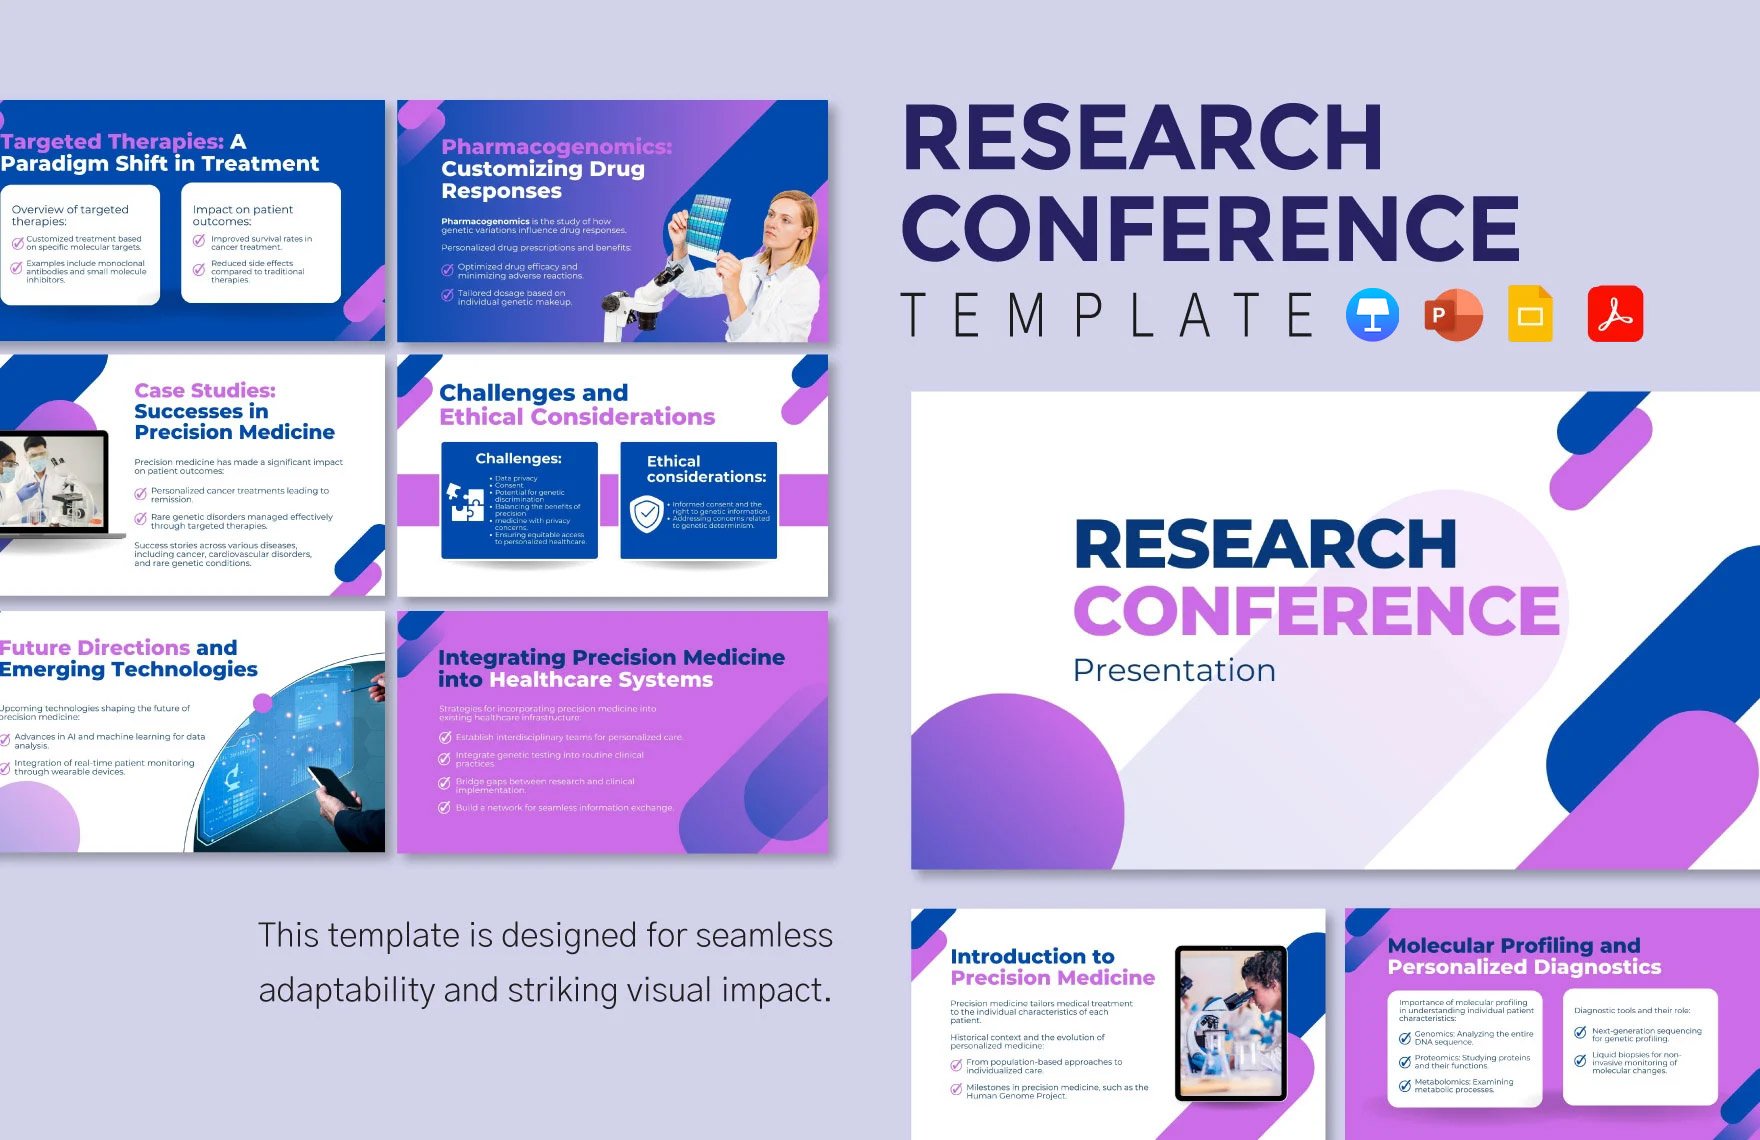 Research Conference Template in PDF, PowerPoint, Apple Keynote